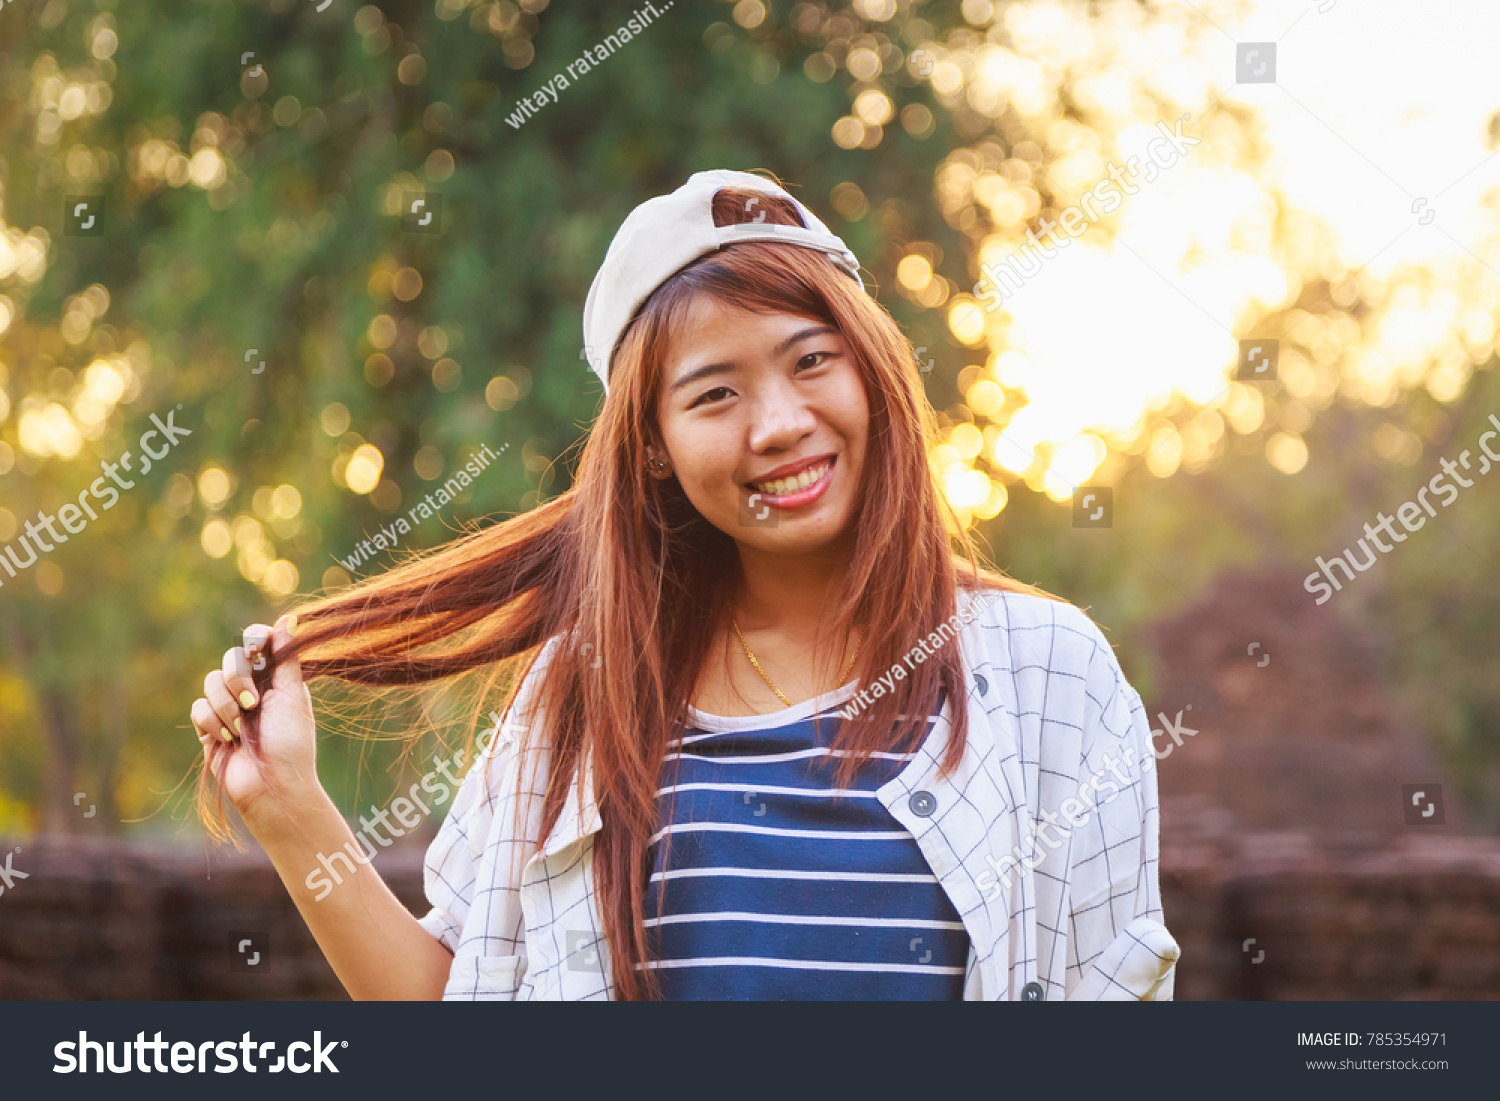 pretty Asian tourist woman outdoor portrait with sunset sky background #785354971